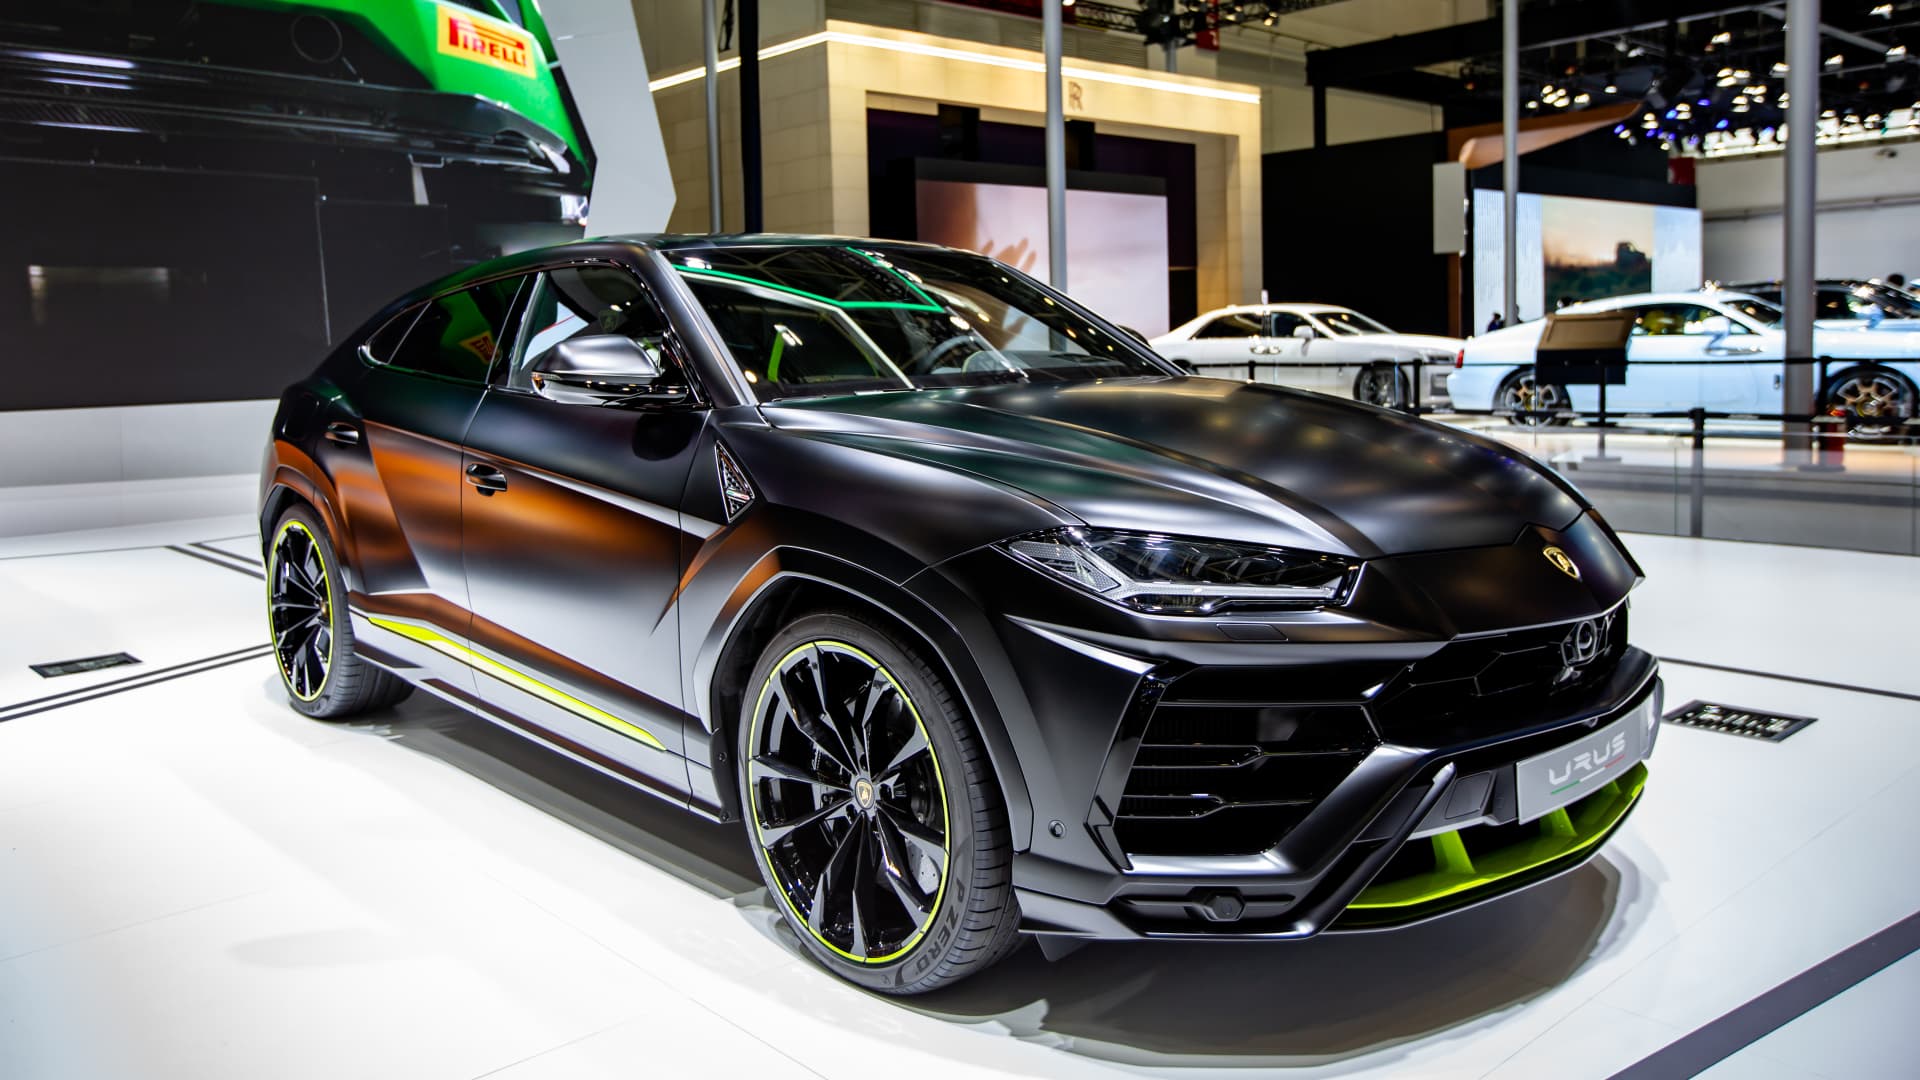 A Lamborghini Urus car is on display during 2020 Beijing International Automotive Exhibition (Auto China 2020) at China International Exhibition Center on October 1, 2020 in Beijing, China.